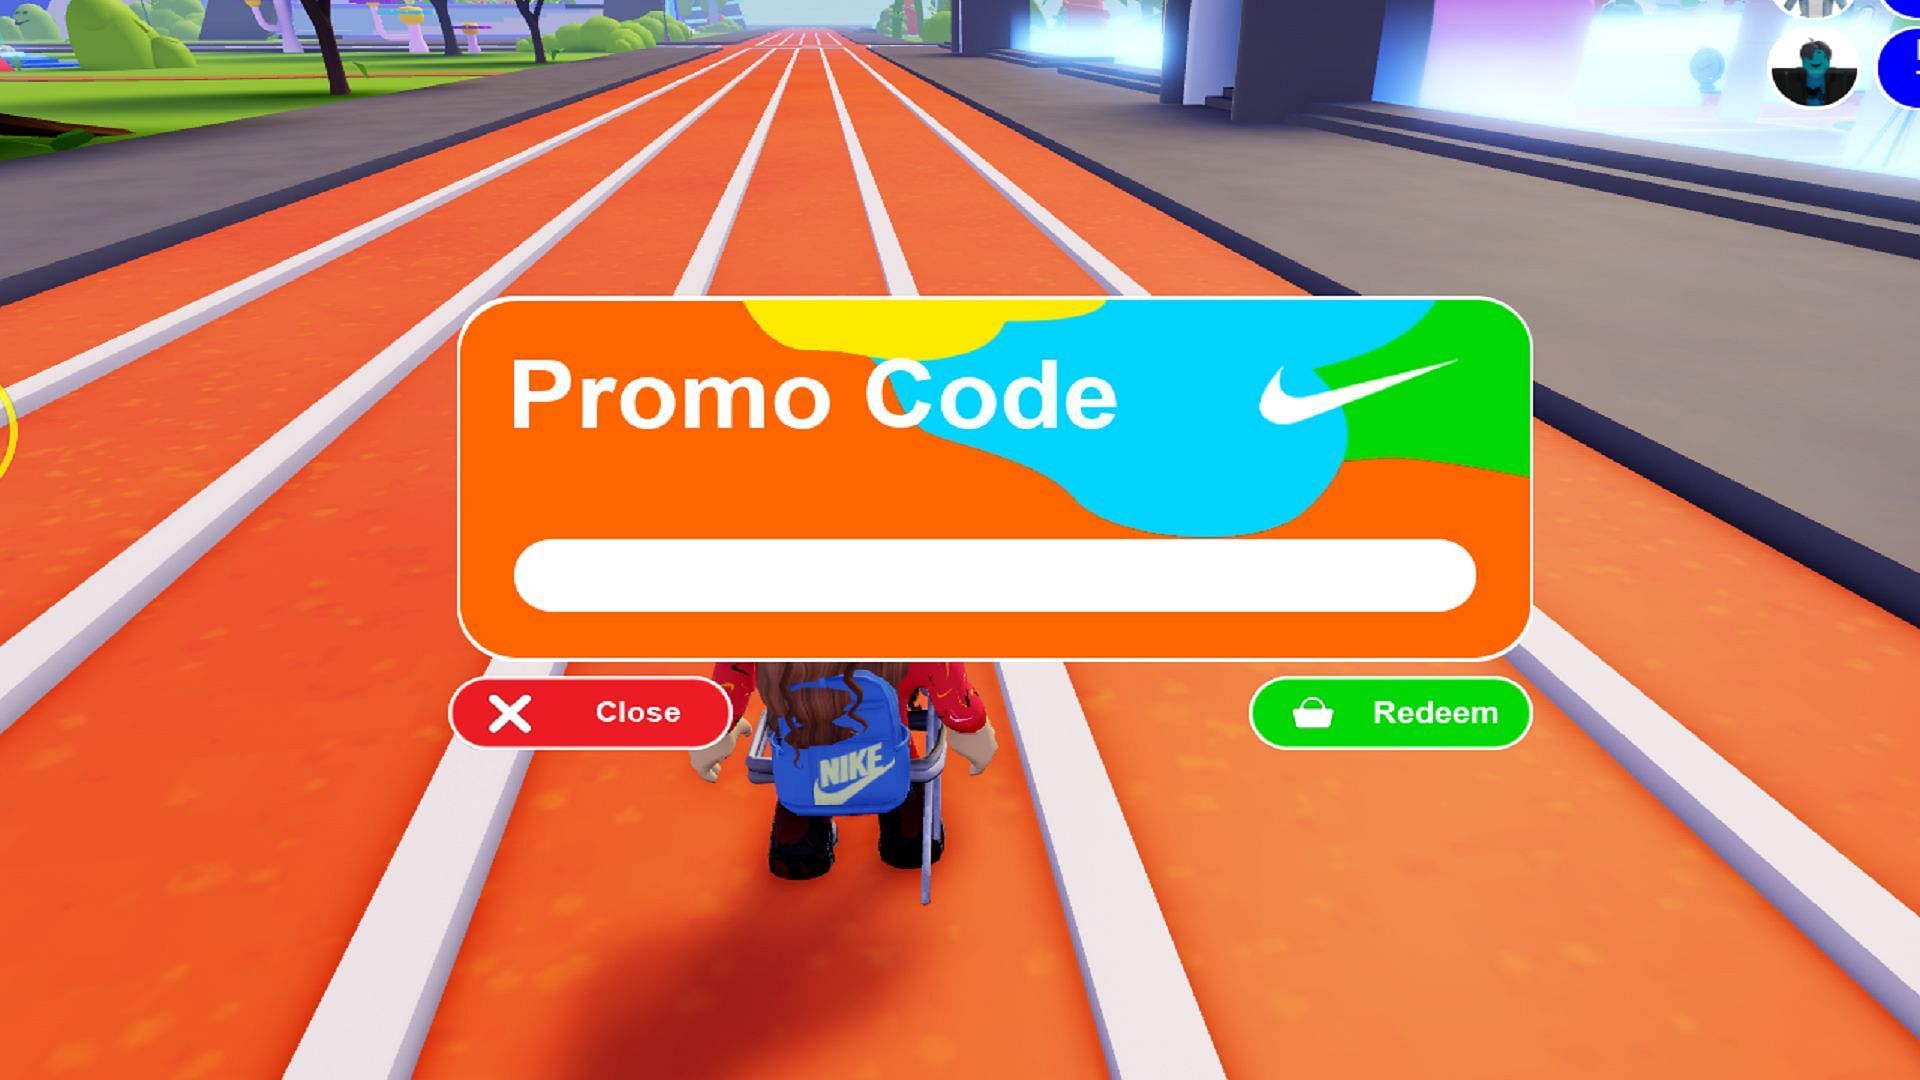 A lot of users search for Promo Codes to receive free items (Image via Roblox)